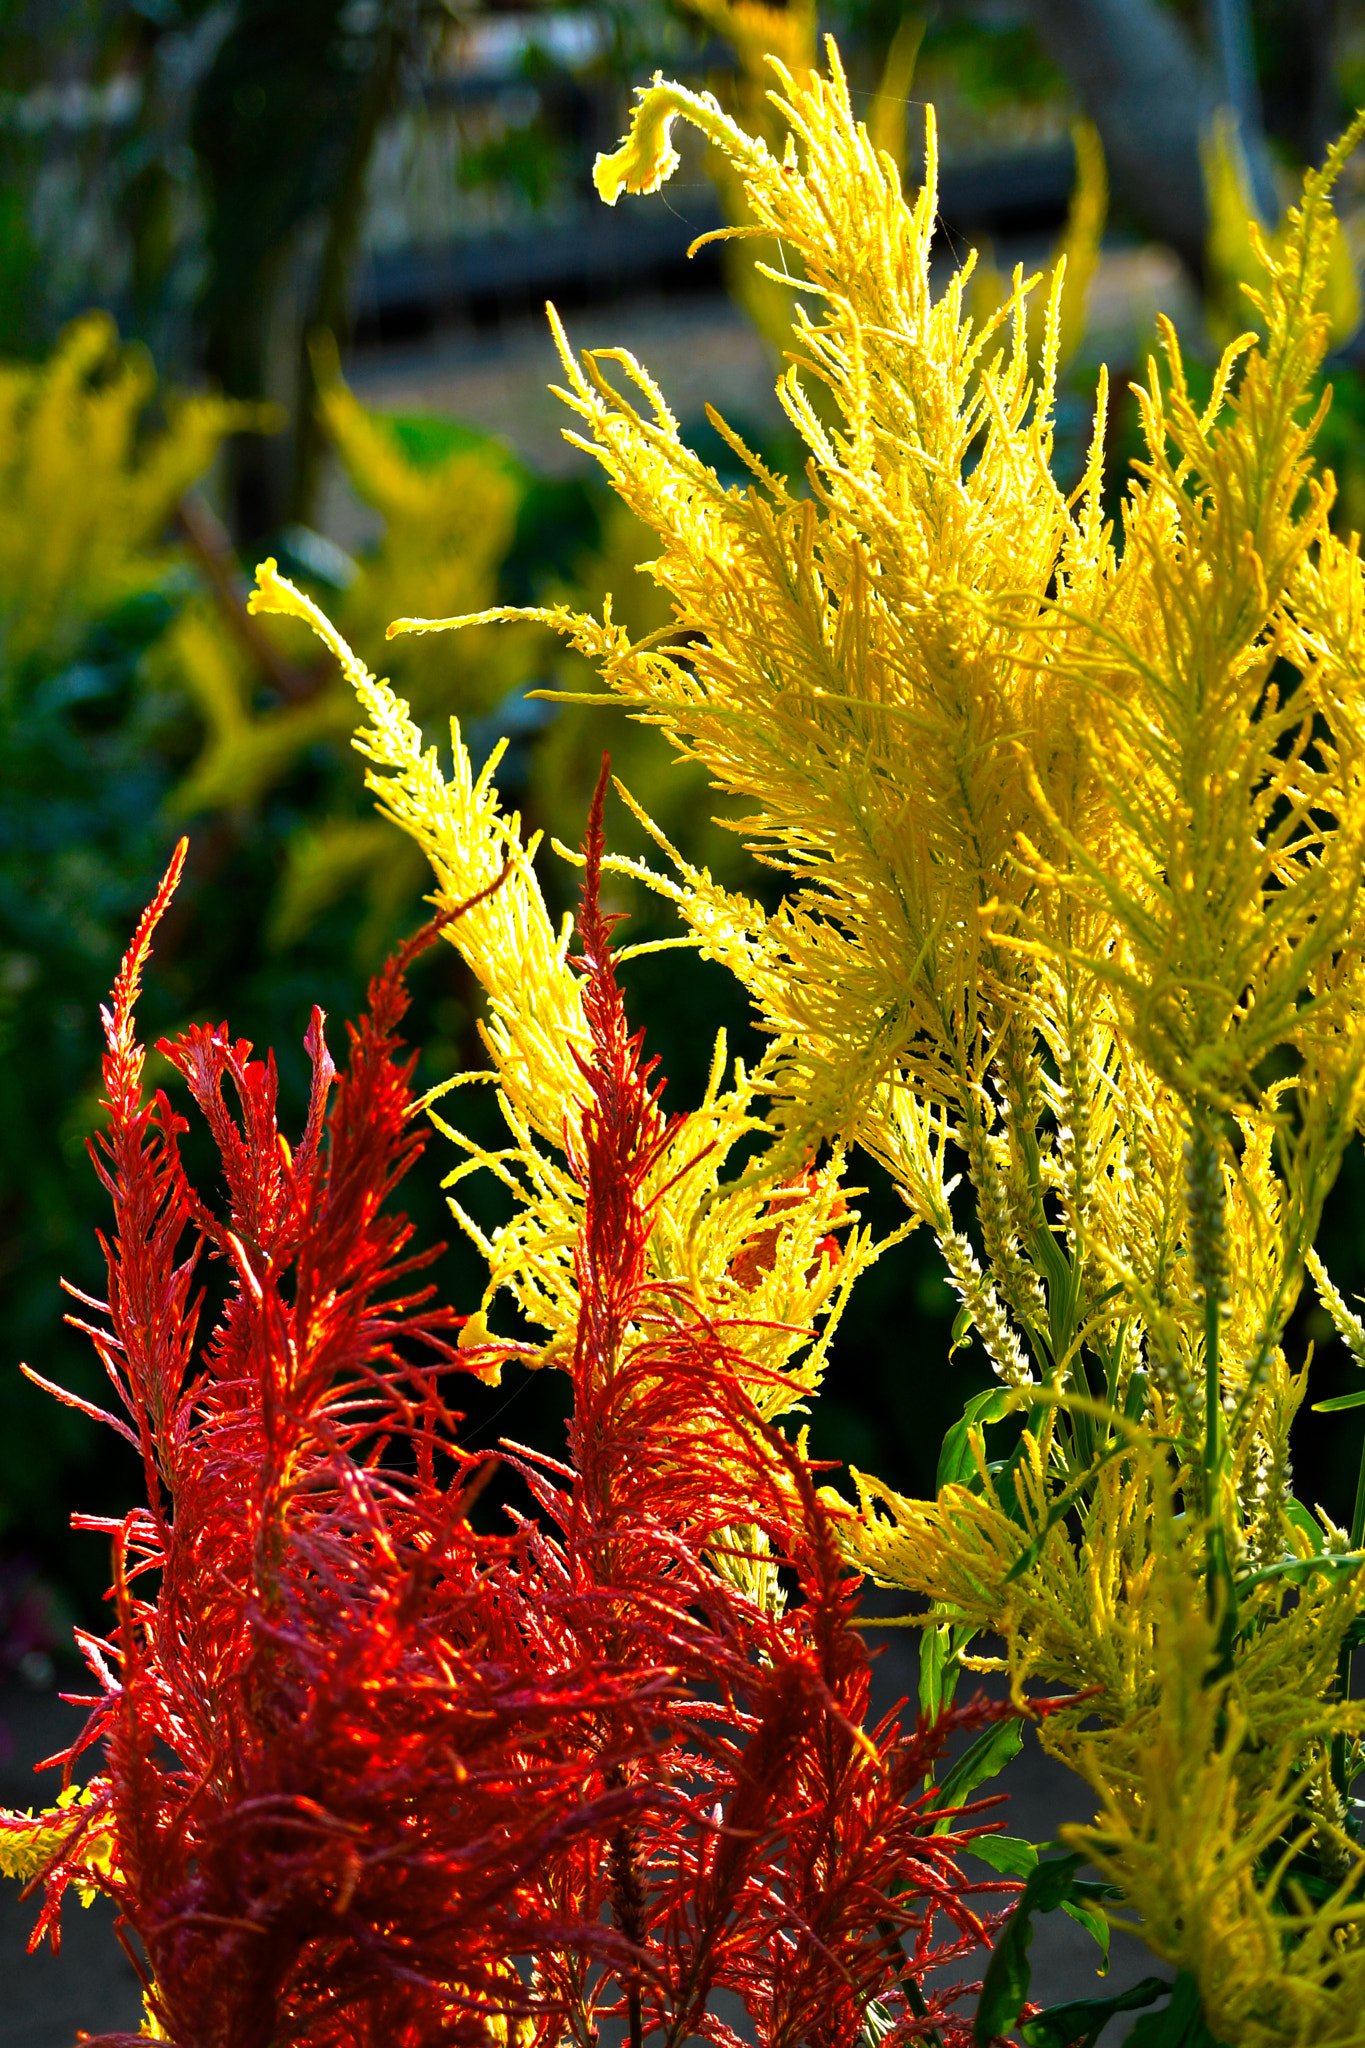 Sony a99 II sample photo. Red and yellow plants in the garden photography